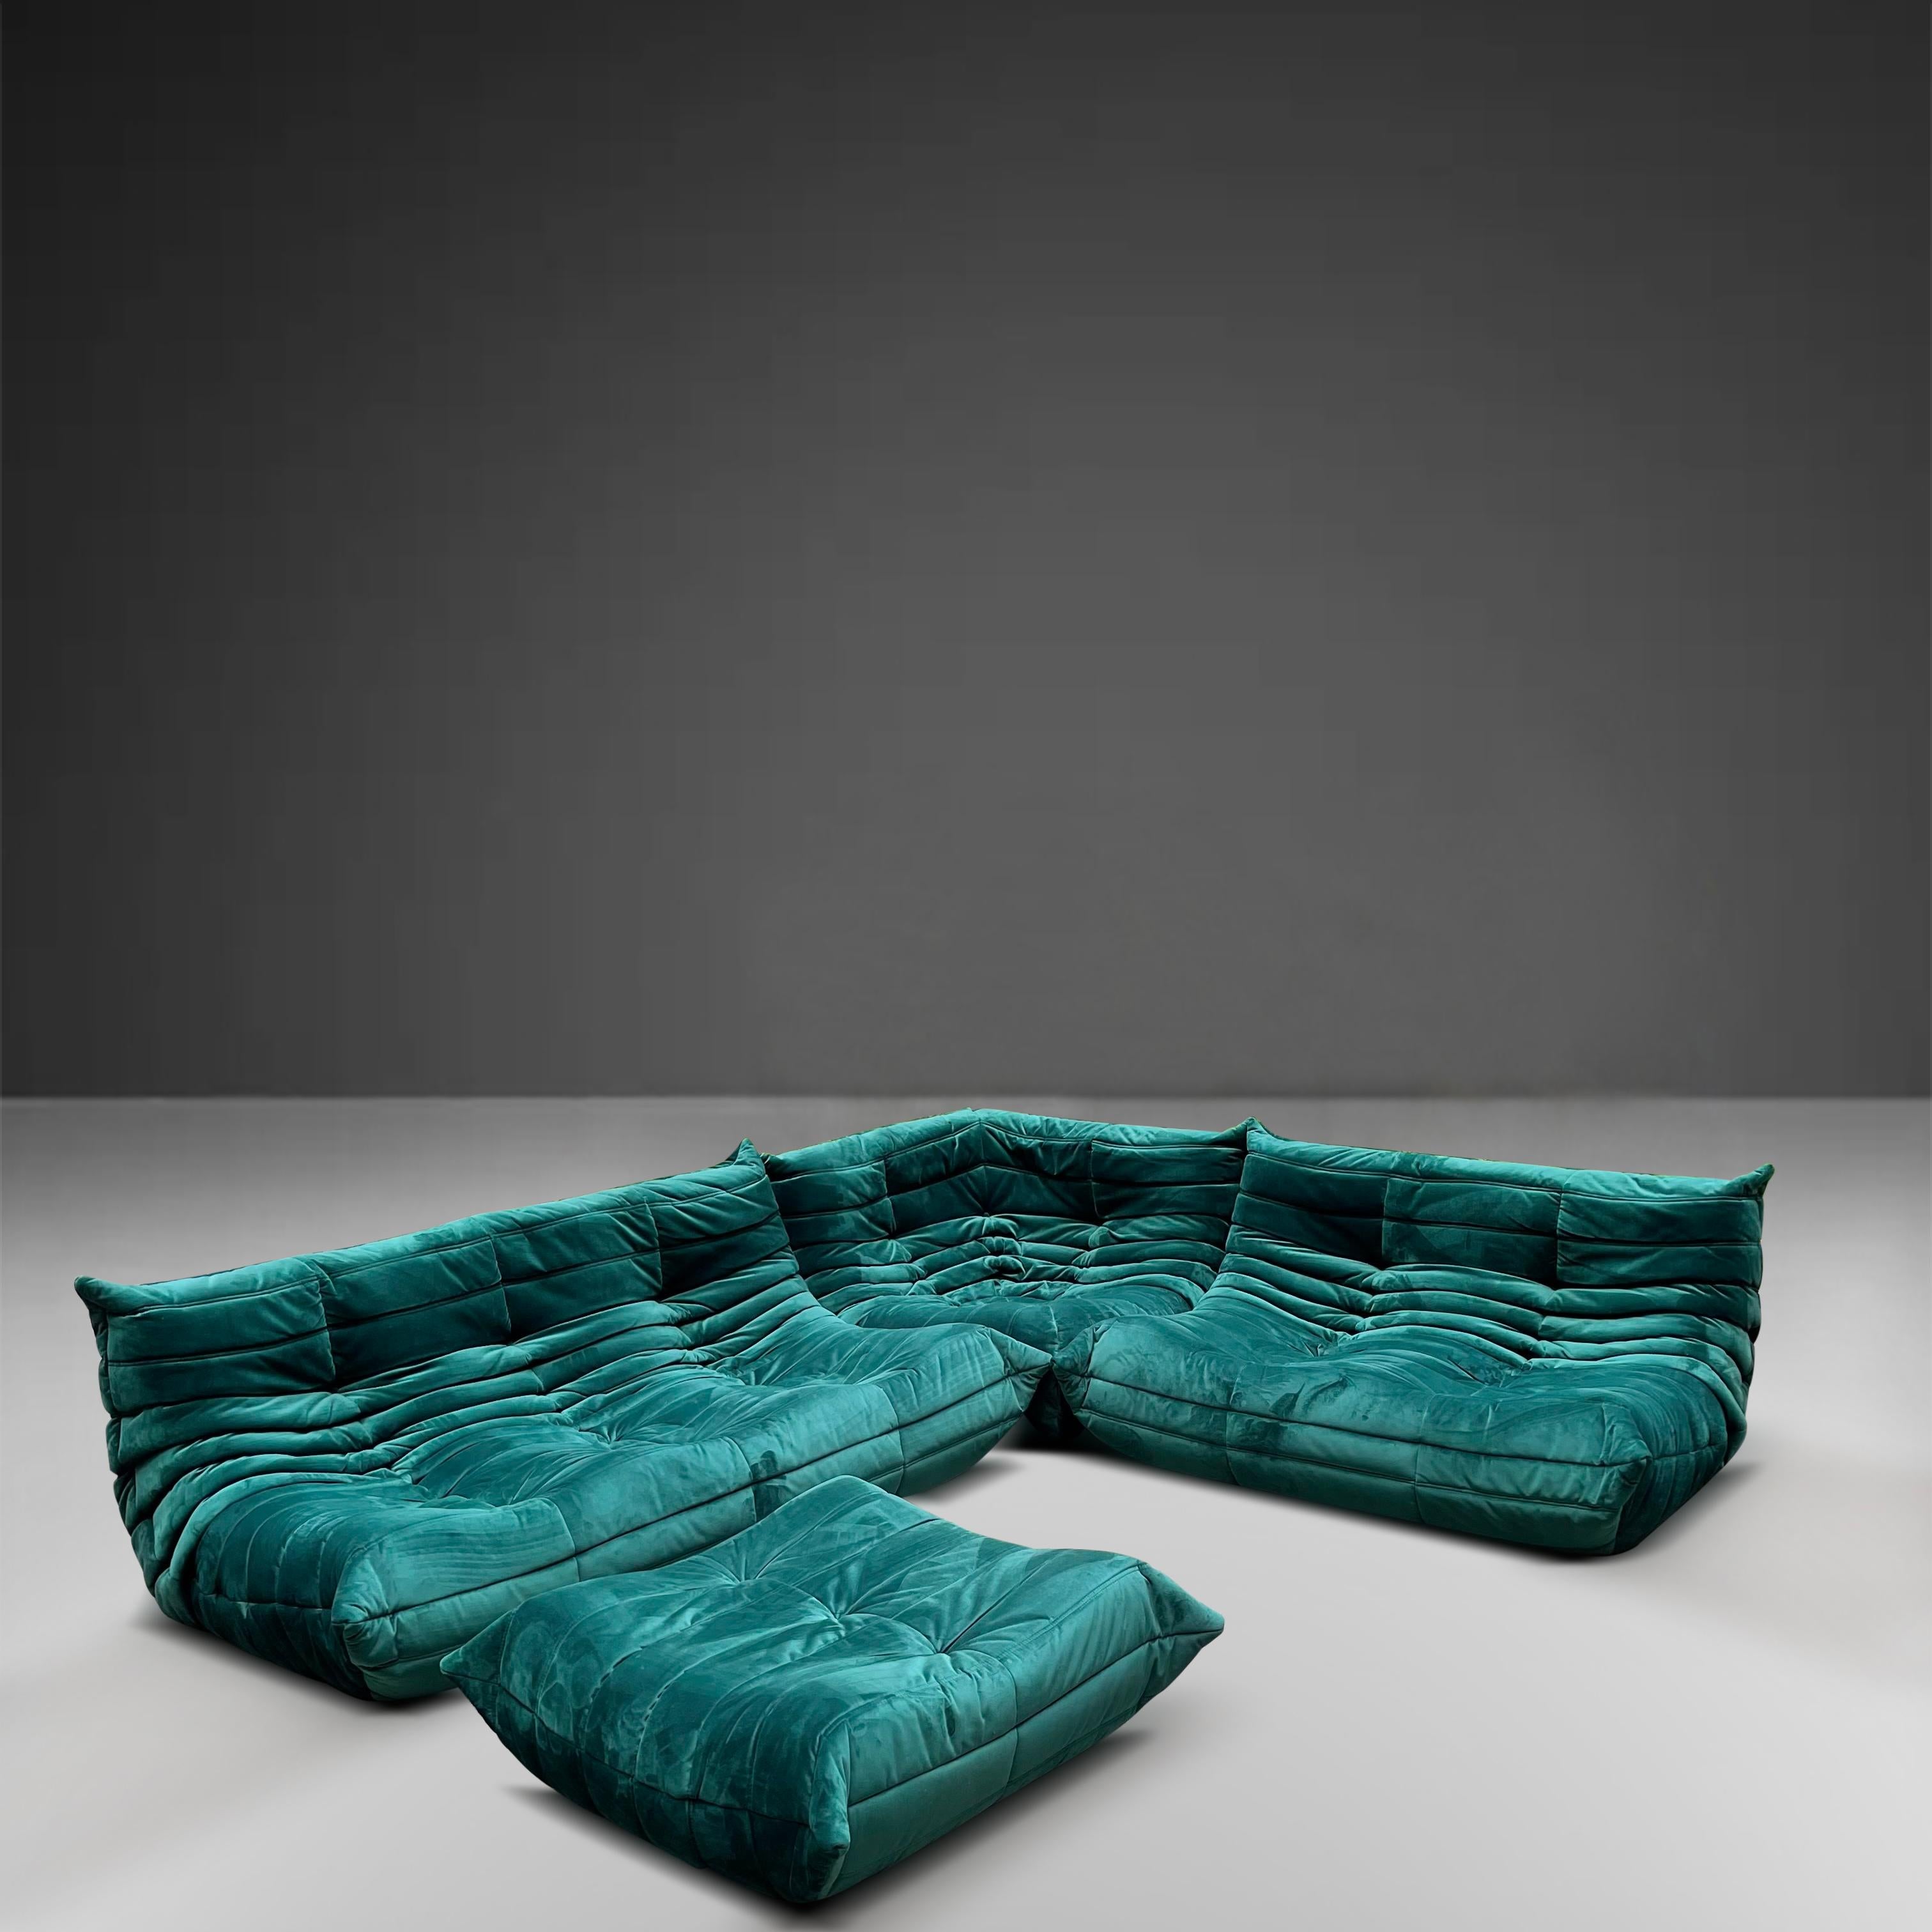 Ligne Roset 'Togo' seating group in emerald green velour fabric comes with two sofas one 3-seater and one 2-seater as well as a corner unit and ottoman.